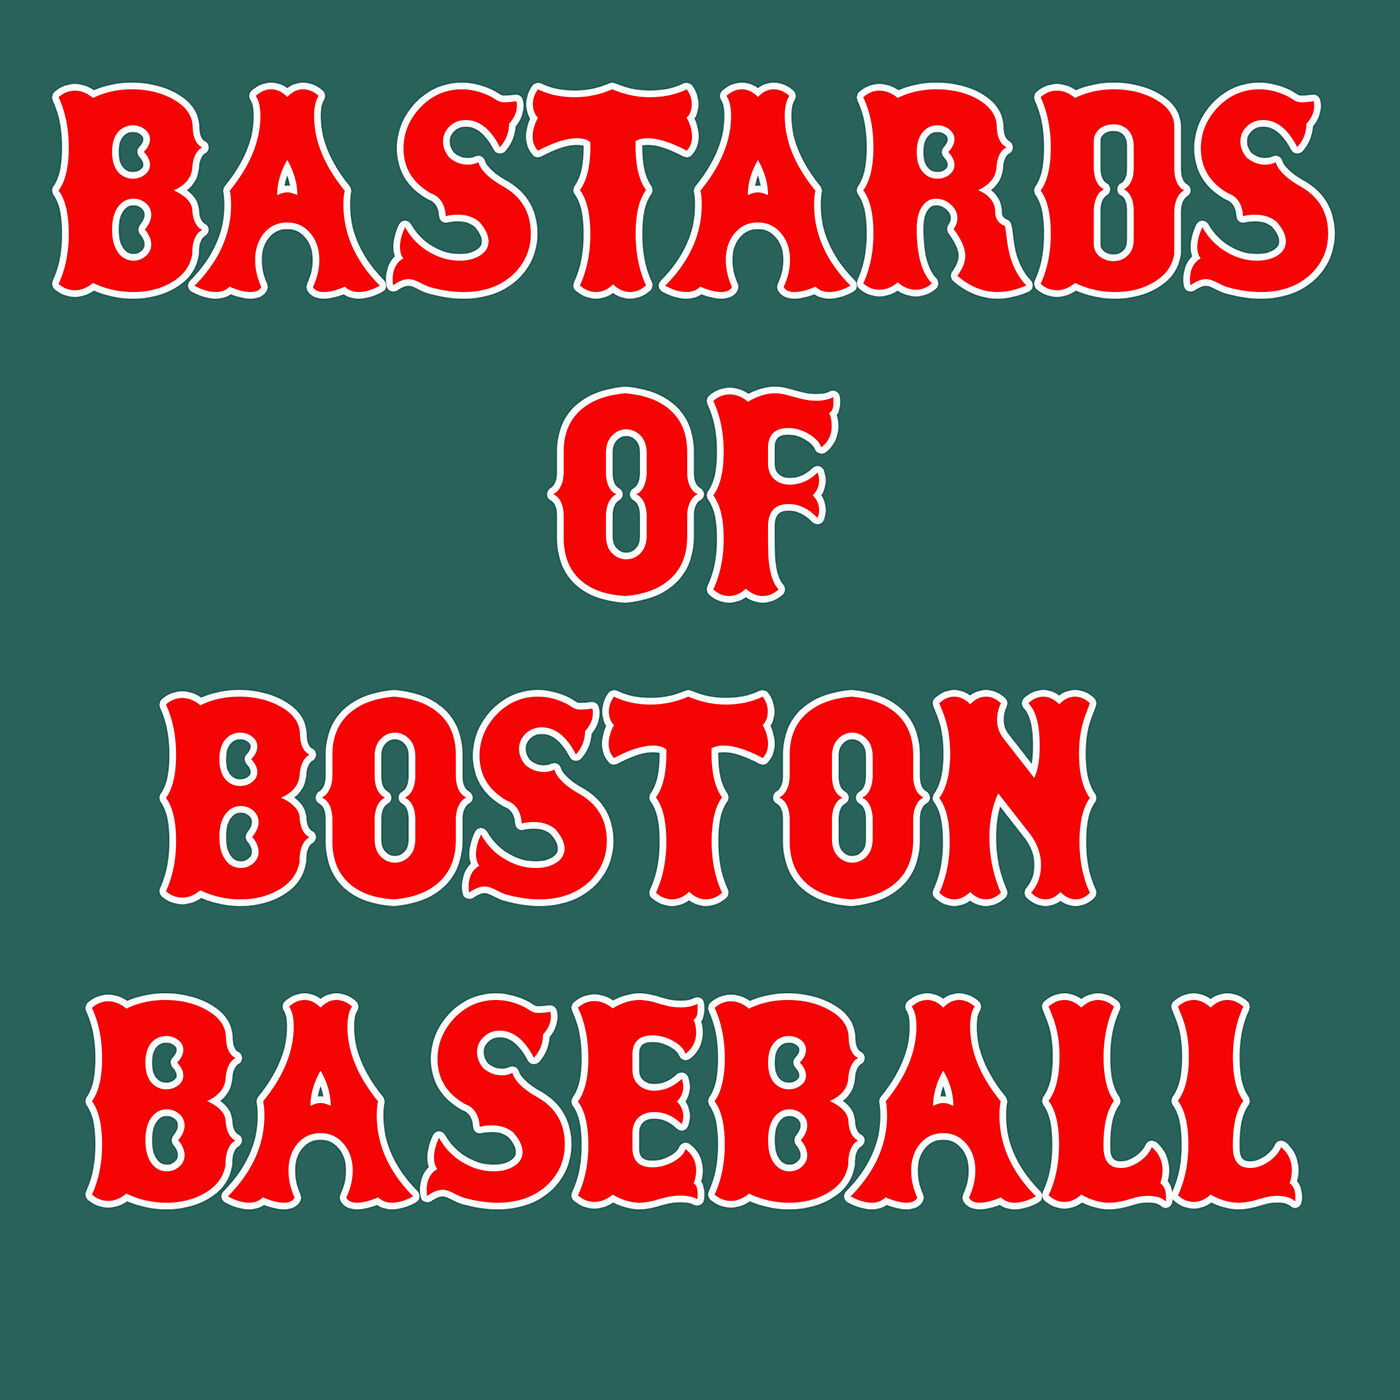 Red Sox Crushed By Orioles!!!